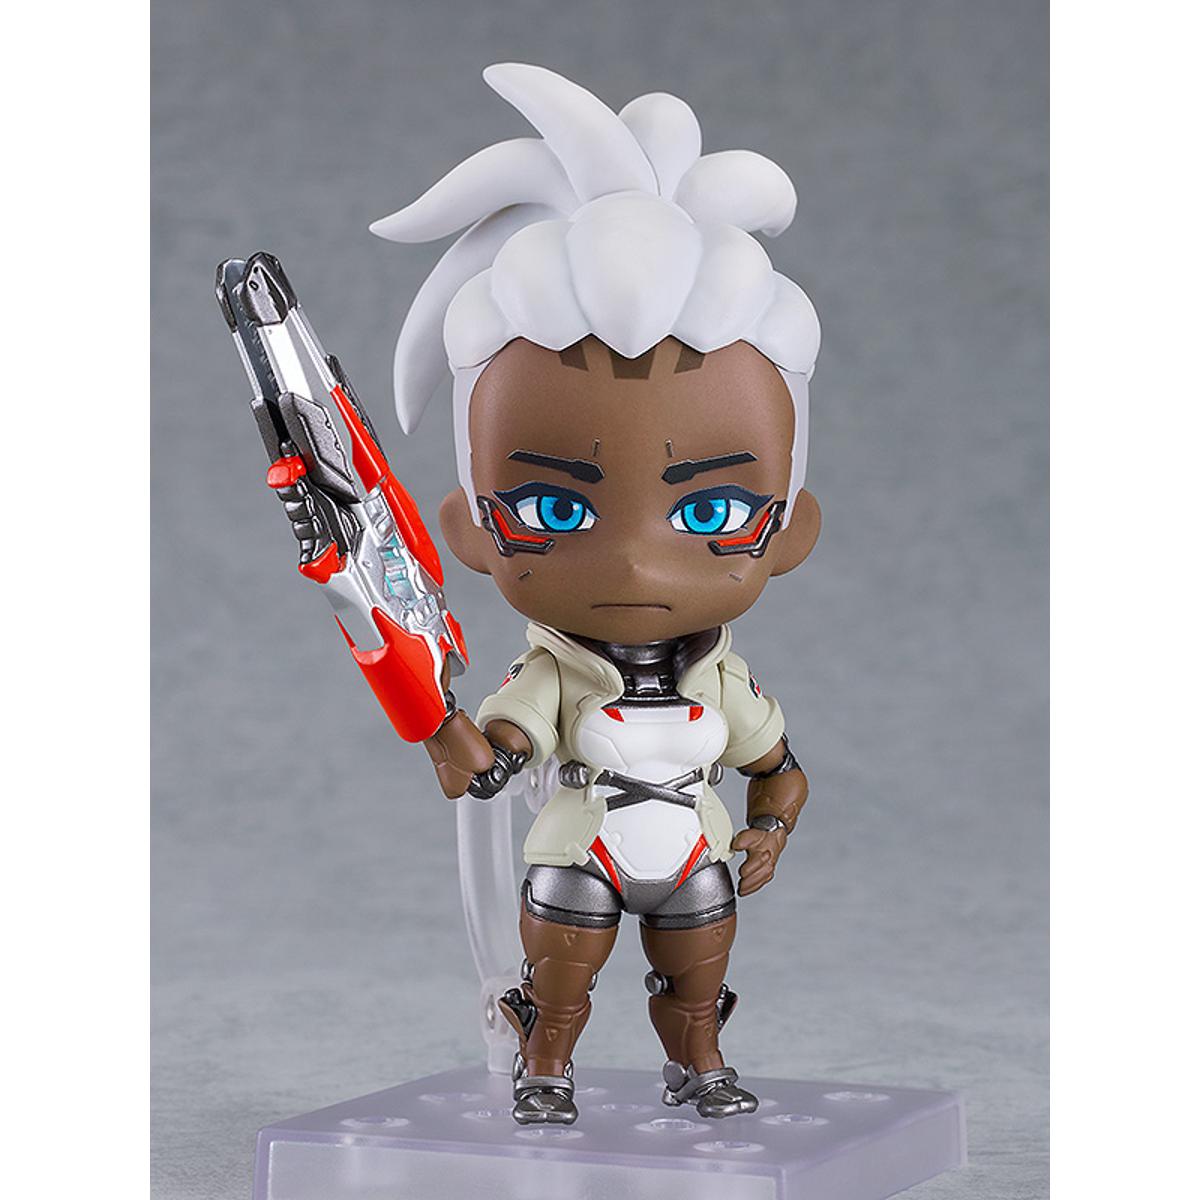 [Pre-order] Overwatch - Sojourn Nendoroid Good Smile Company